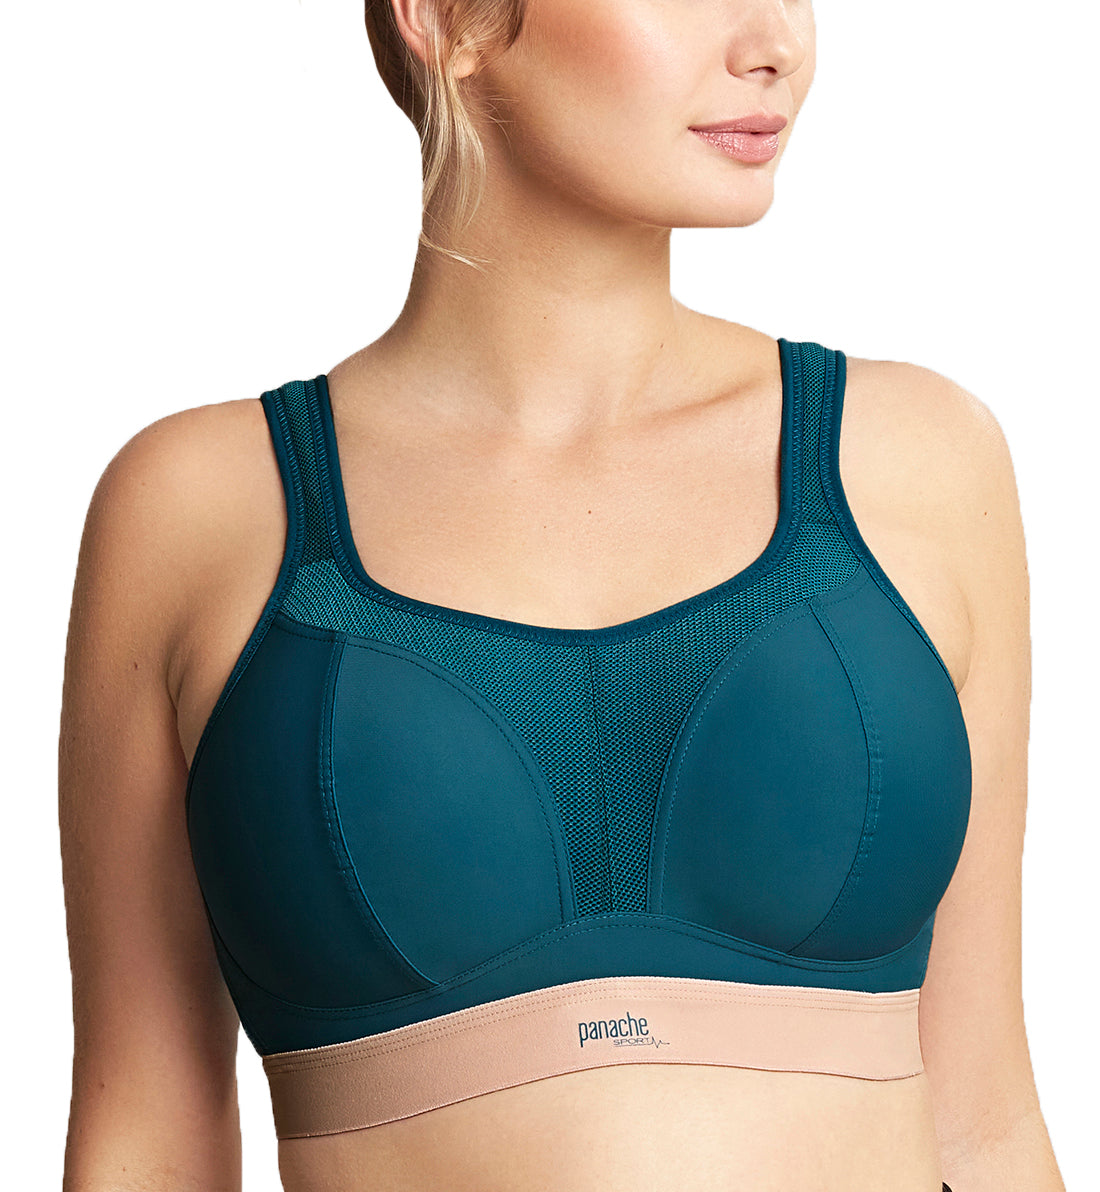 Panache Non-Wire Sports Bra (7341),28F,Teal/Pink - Teal/Pink,28F